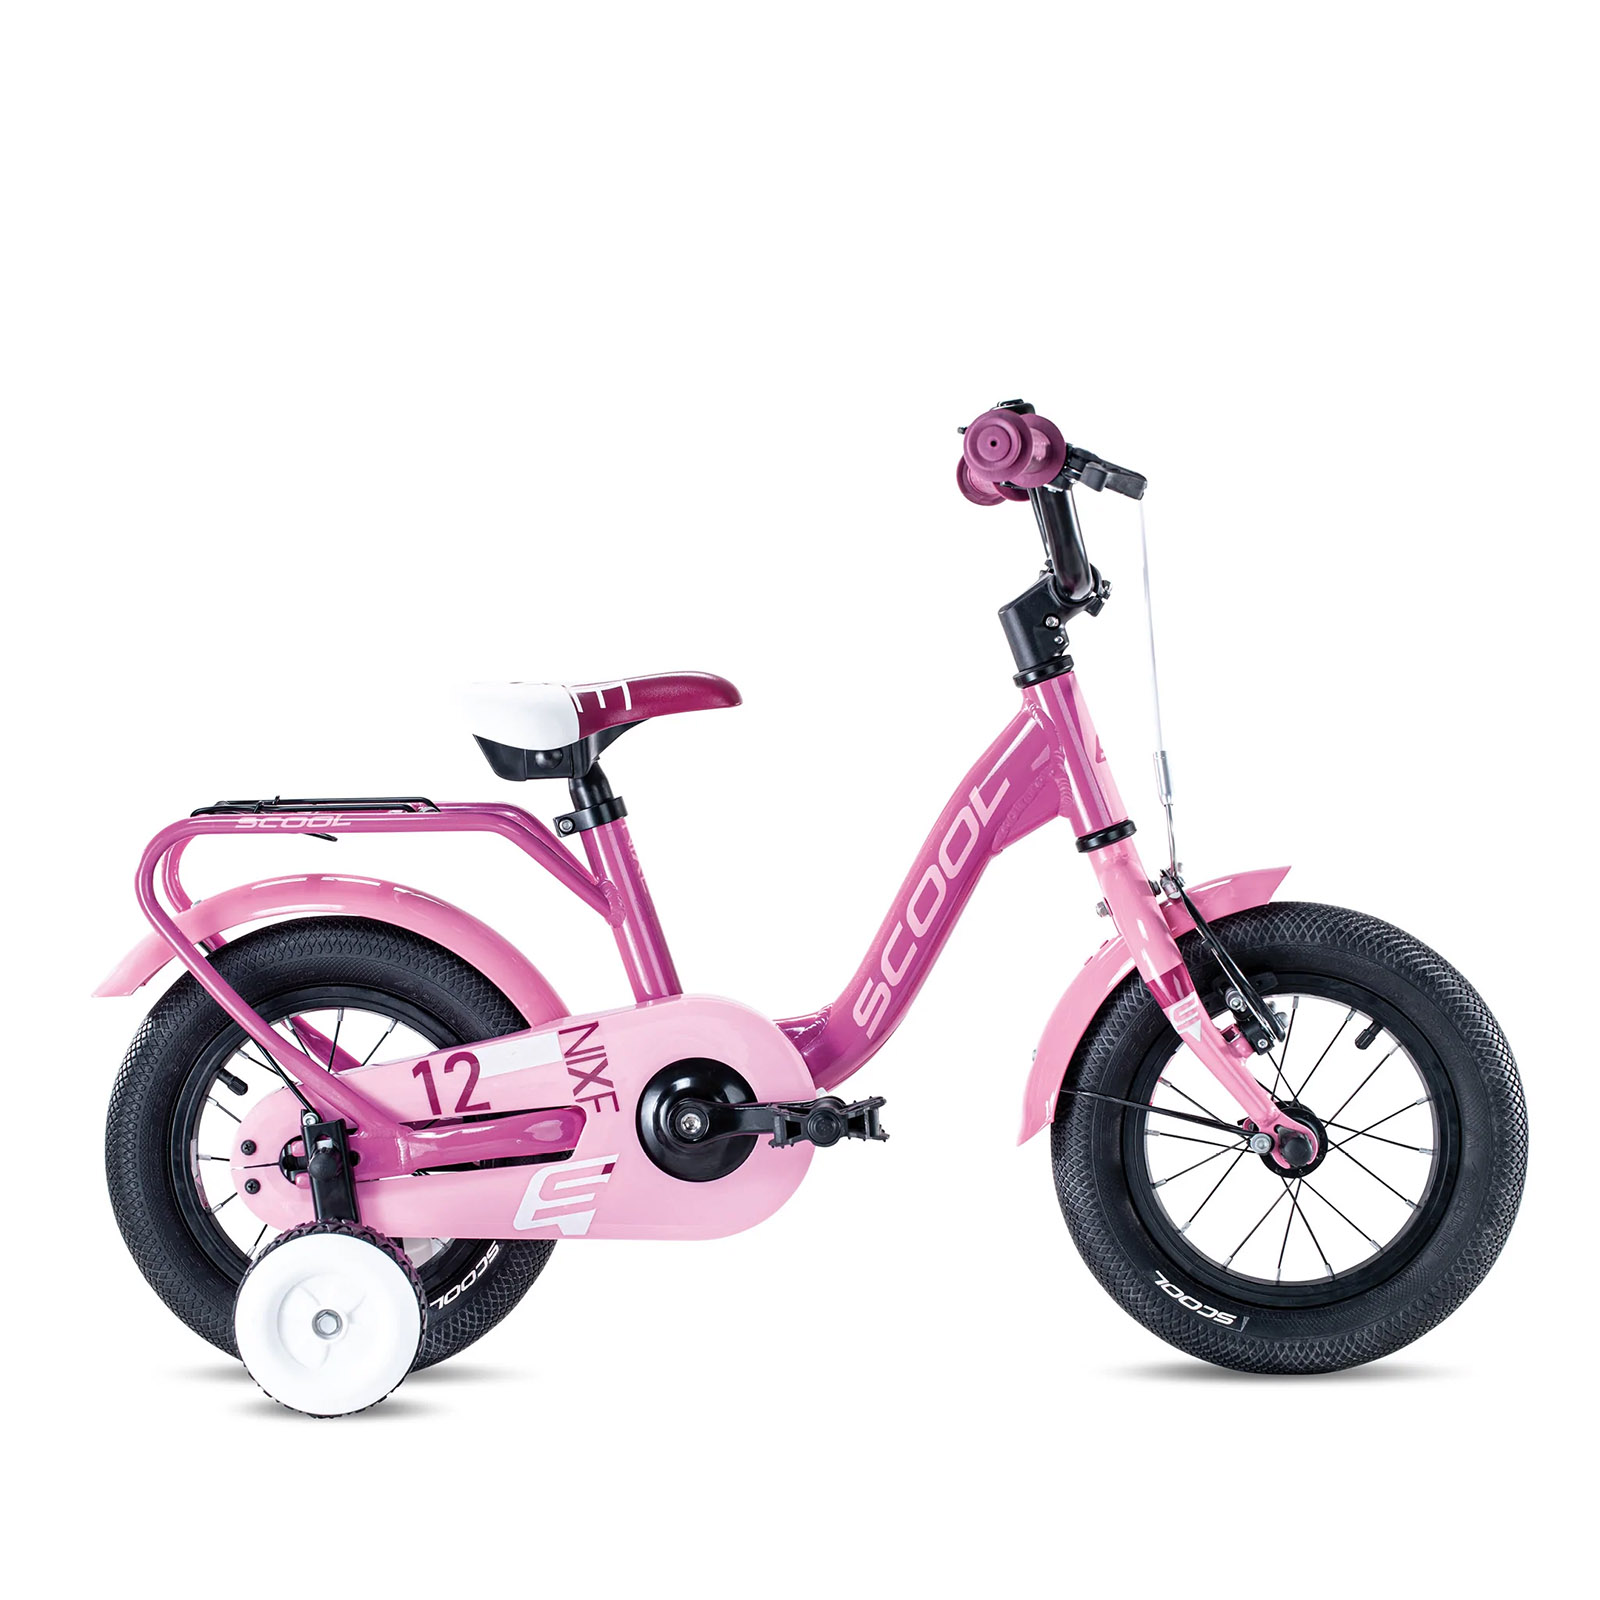 12 Zoll-Kinderfahrrad - S'COOL-niXe 12 Zoll 1-Gang von Coolmobility